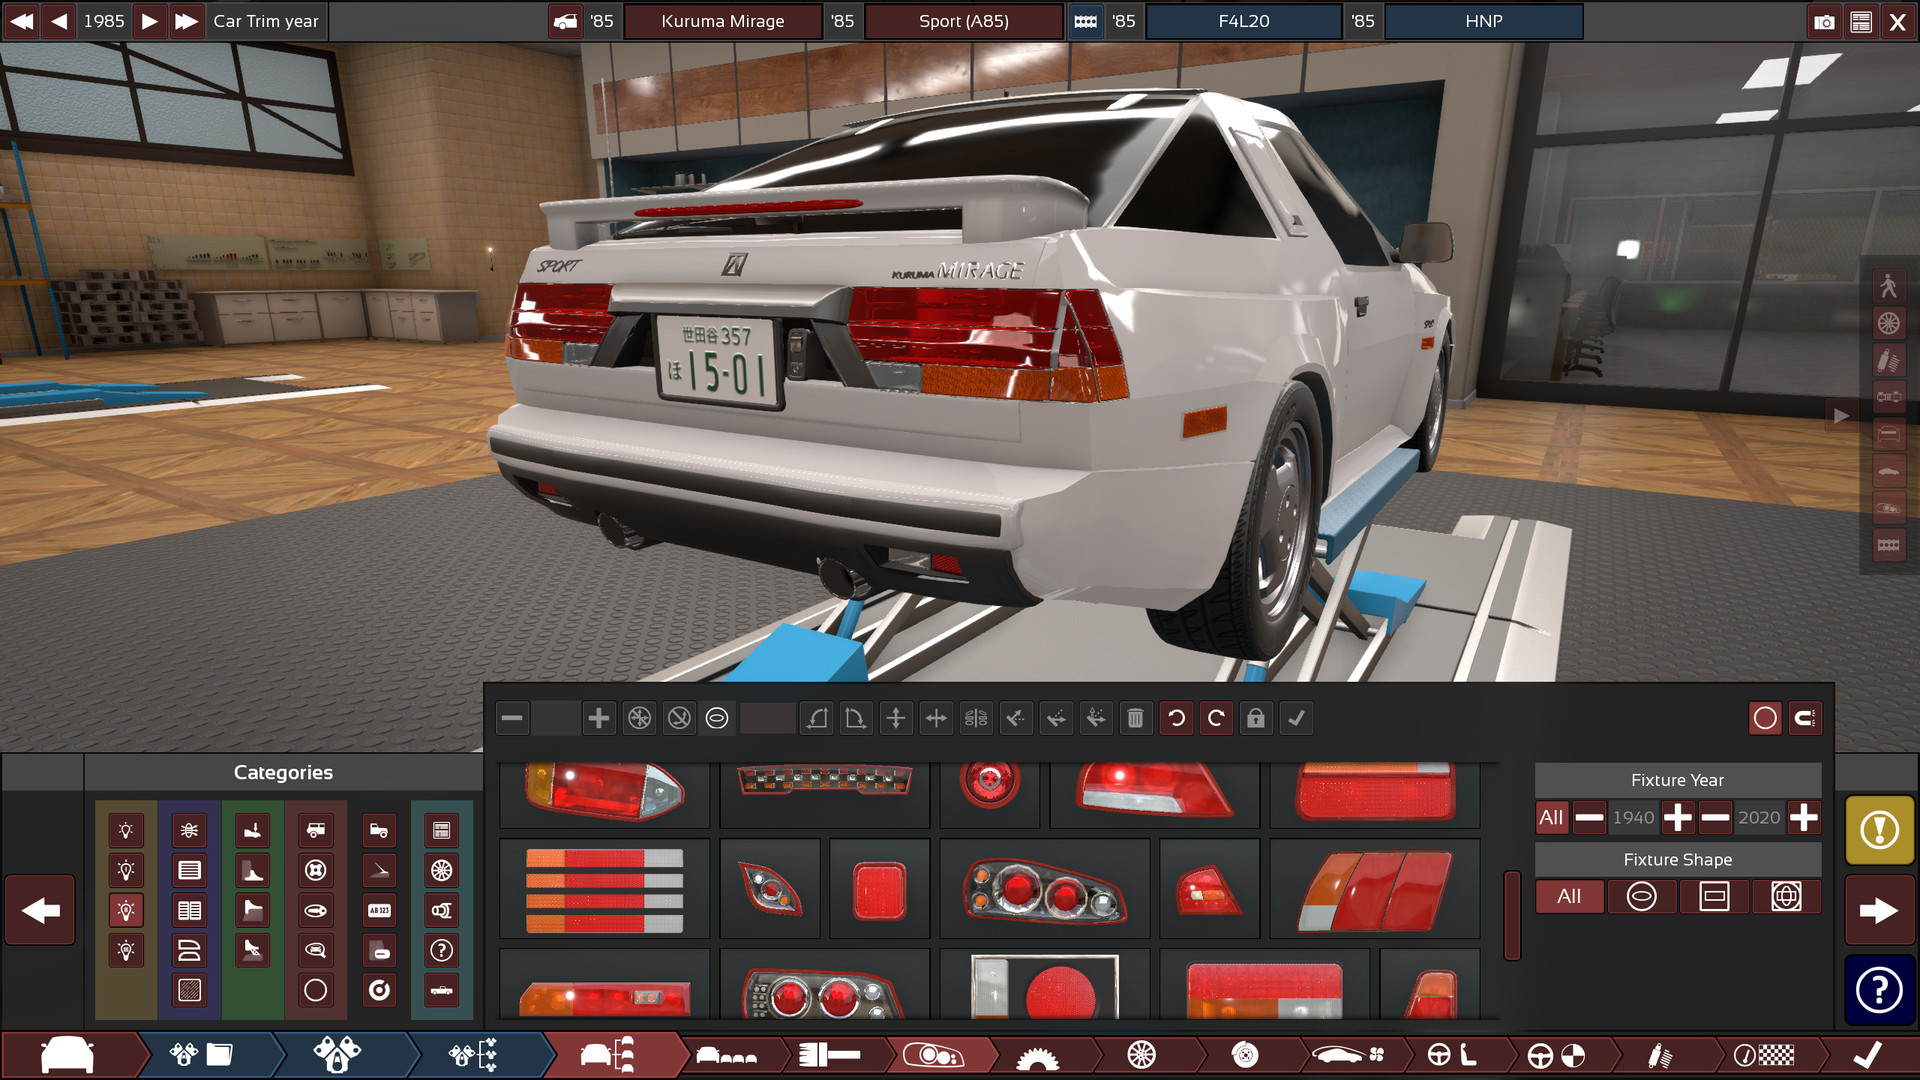 automation the car tycoon game fourms